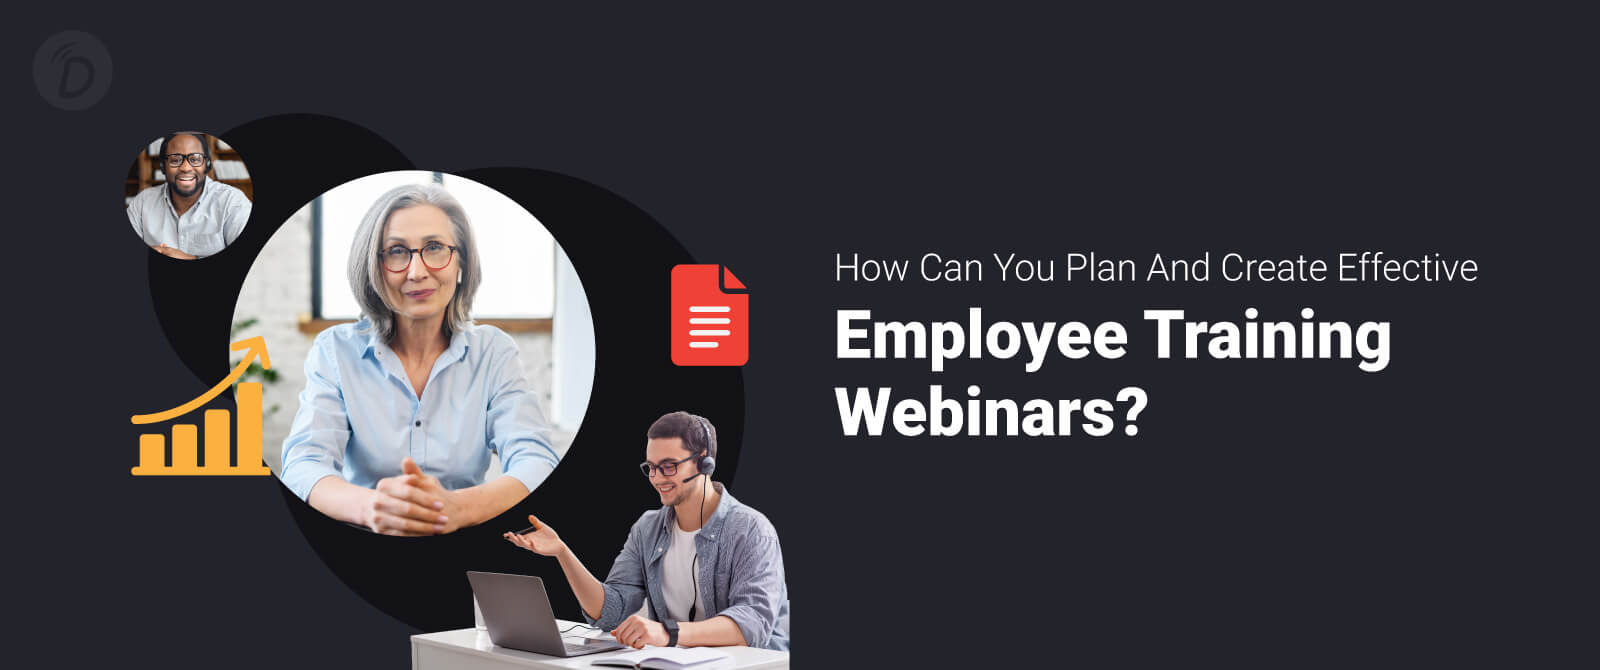 How Can You Plan and Create Effective Employee Training Webinars? Learn With This Guide.